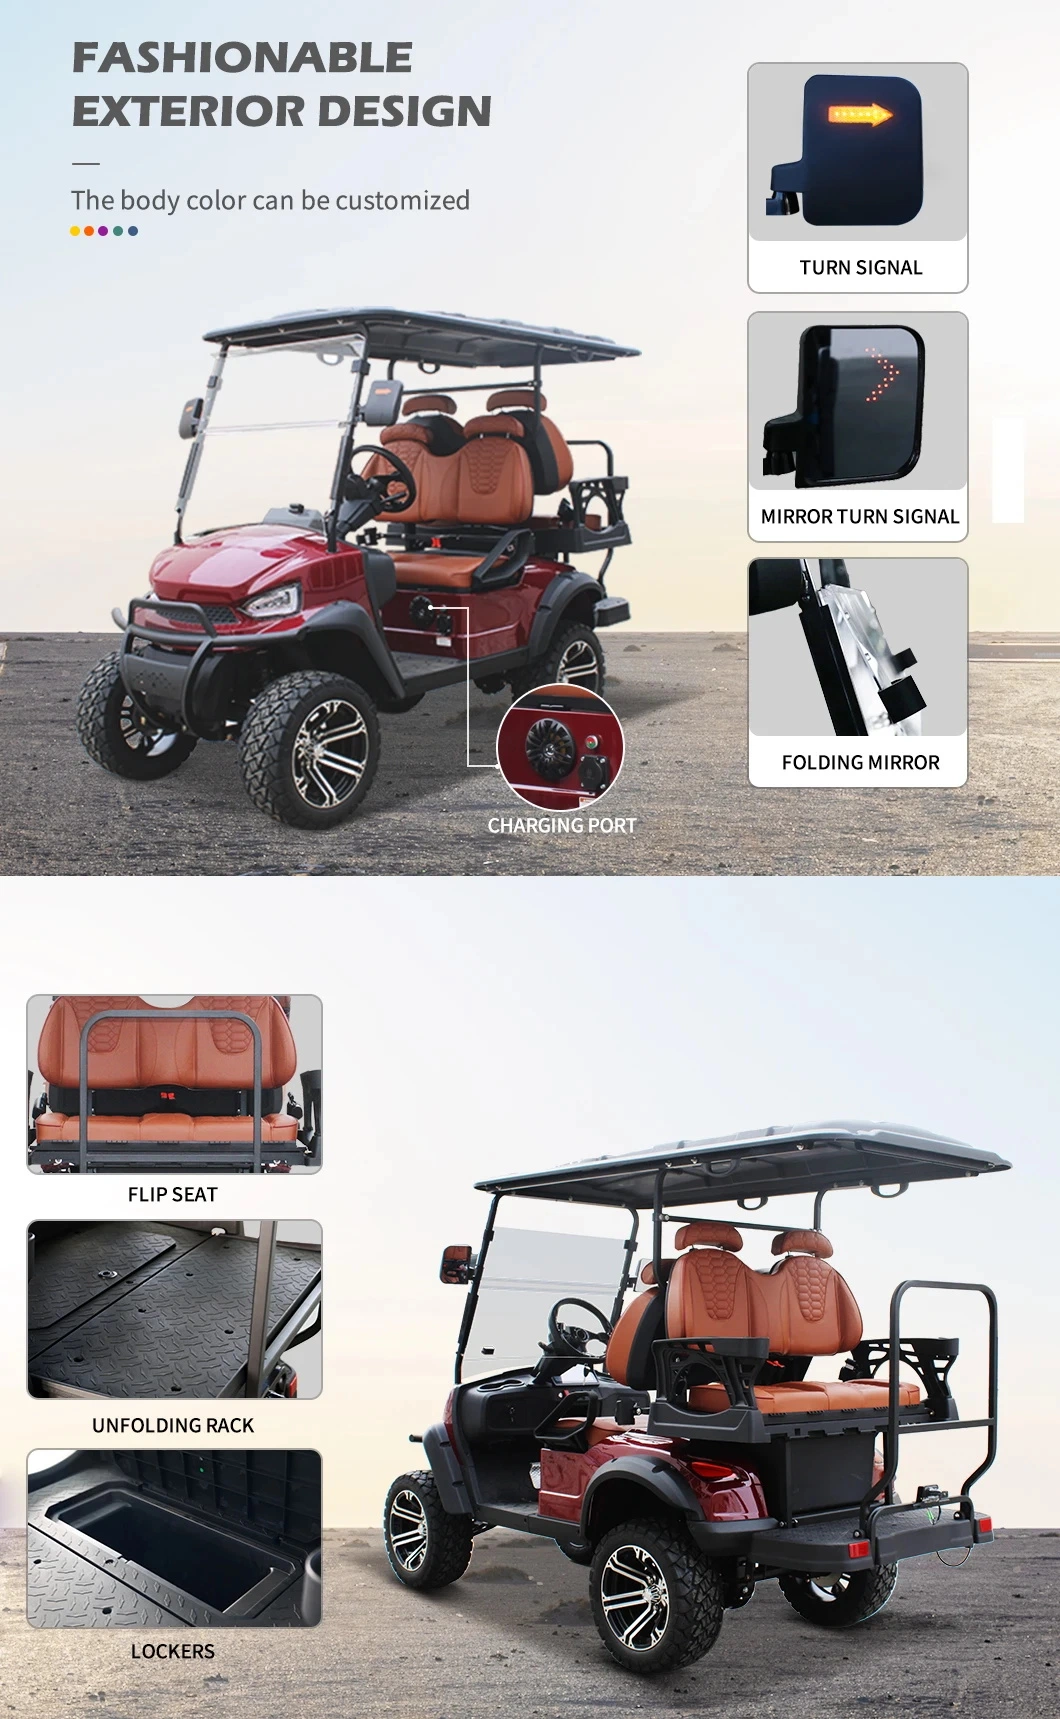 48/72V Aluminum Chassis Frame 4 Seat Electric Lithium Battery Golf Buggy Hunting Cart Street Legal Golf Cart Vehicle